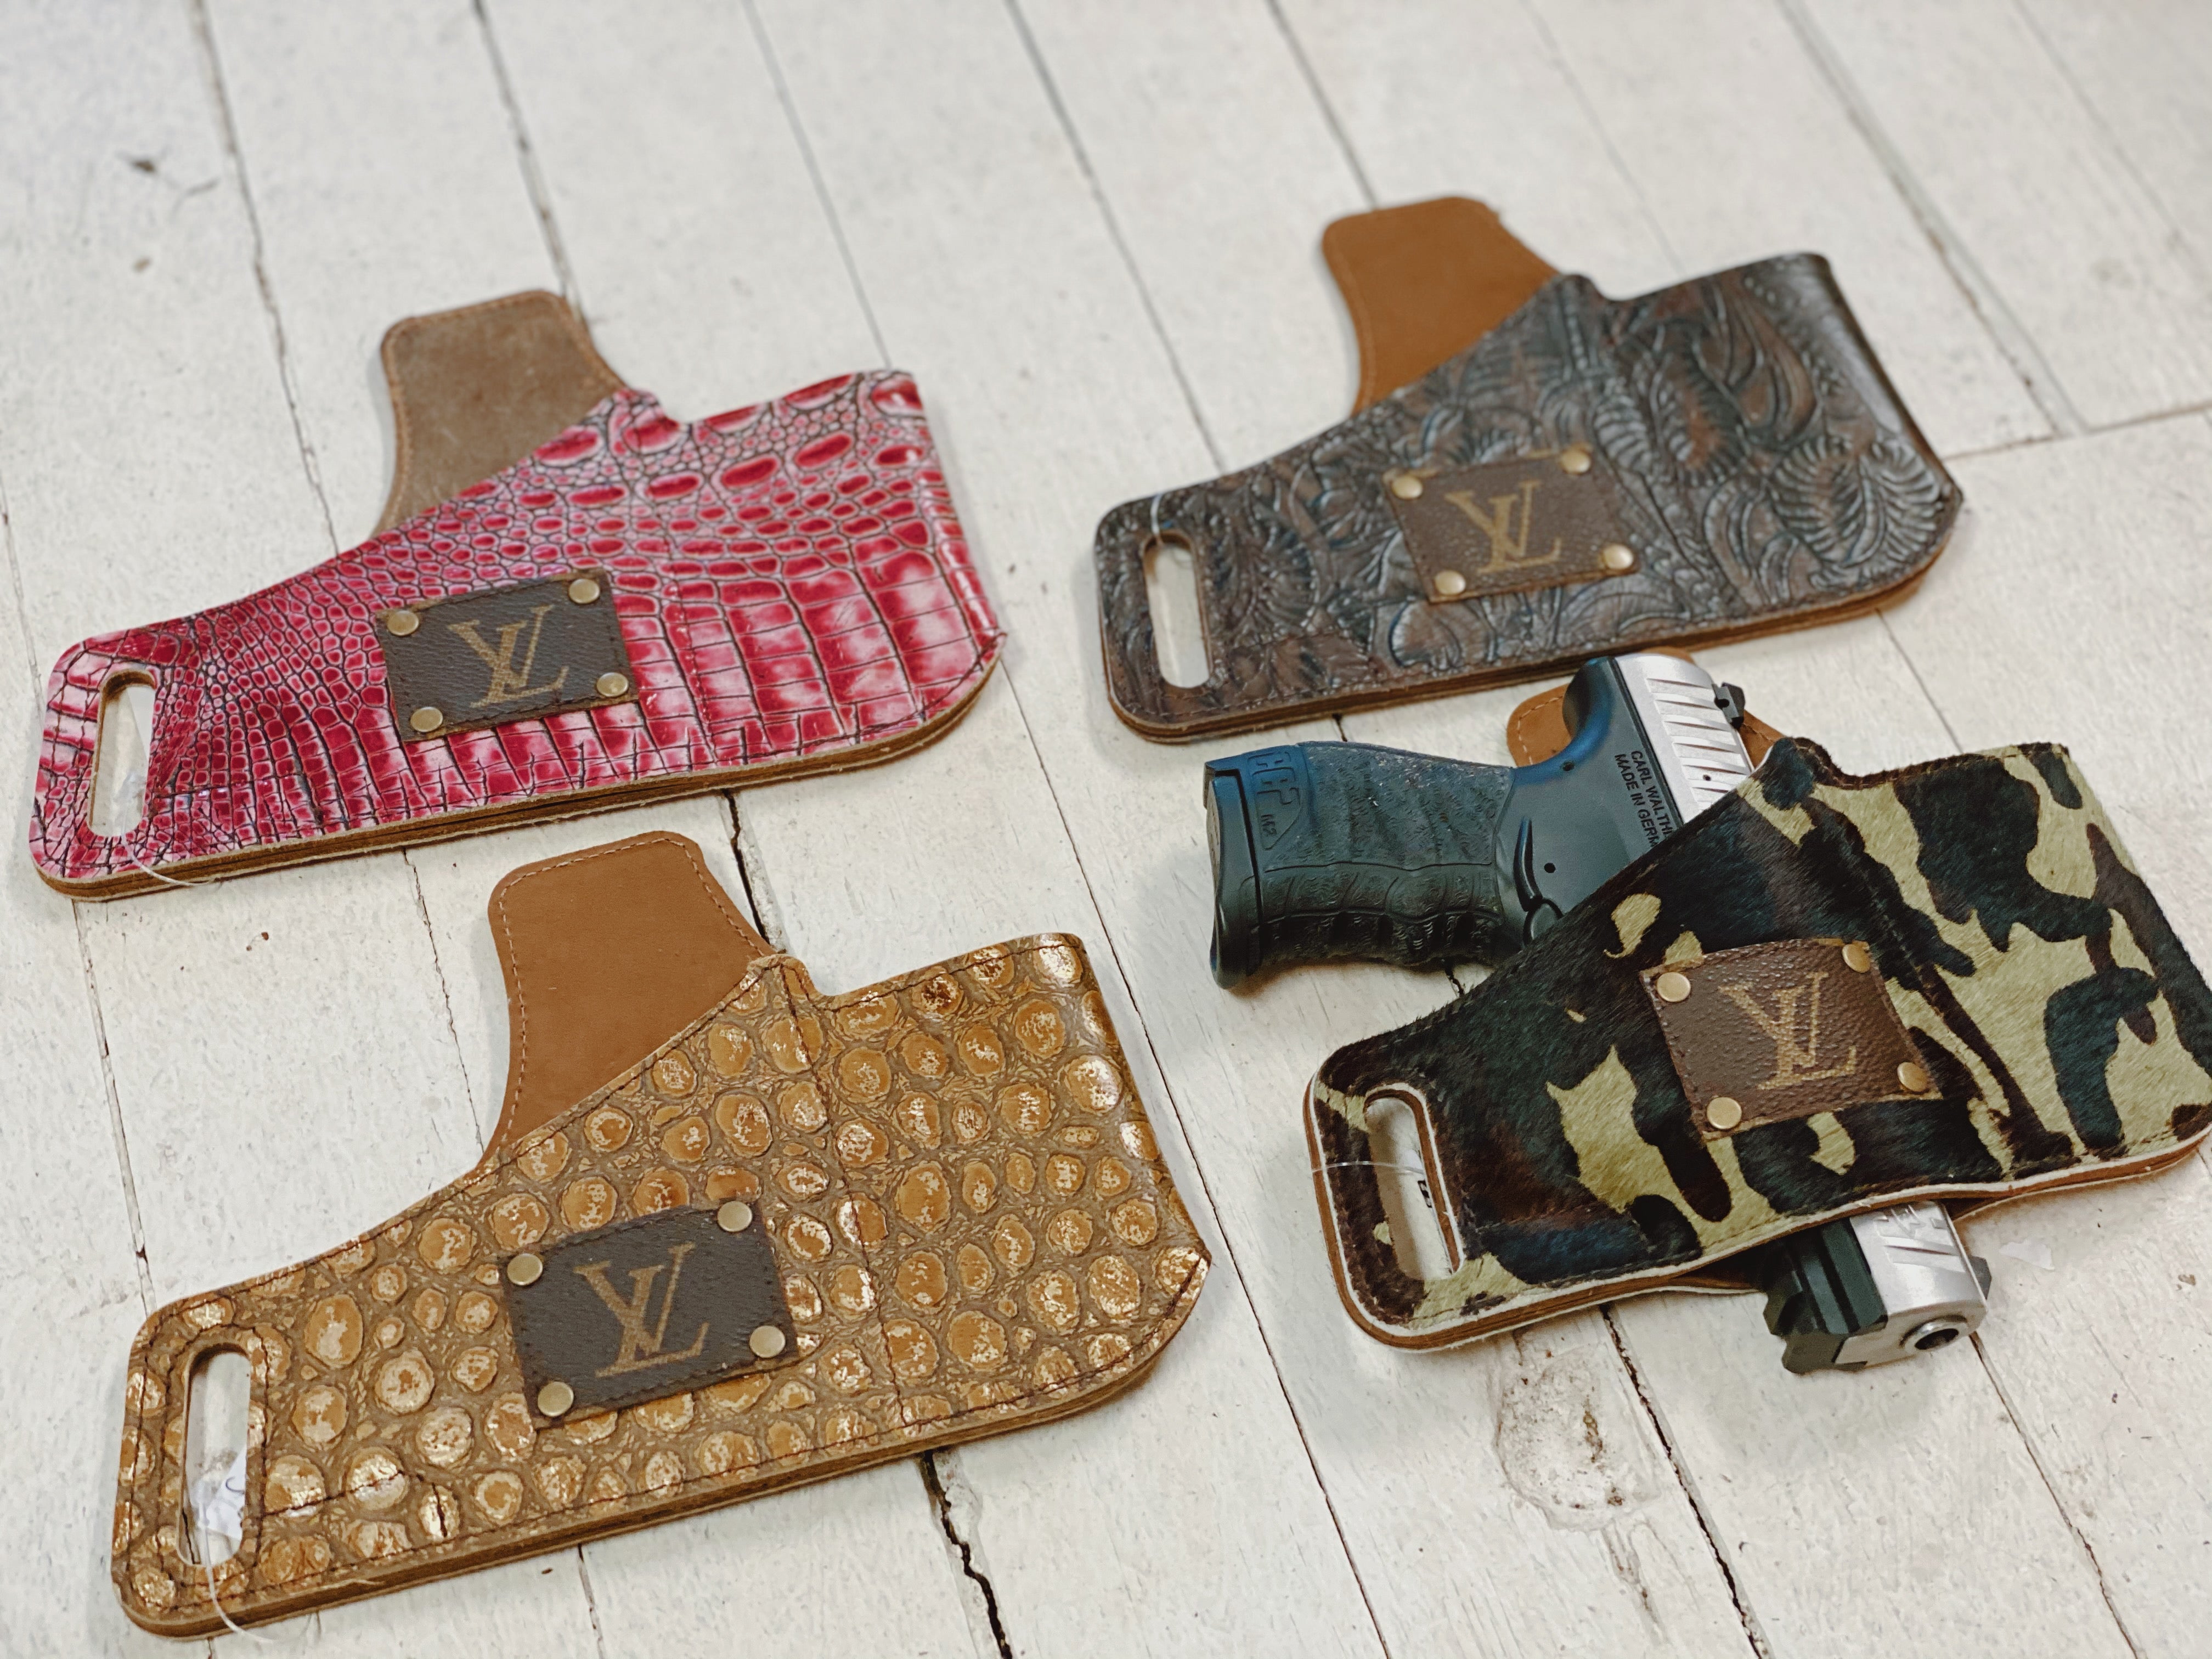 Lawful concealed carry Louis Vuitton style patterned holster for a